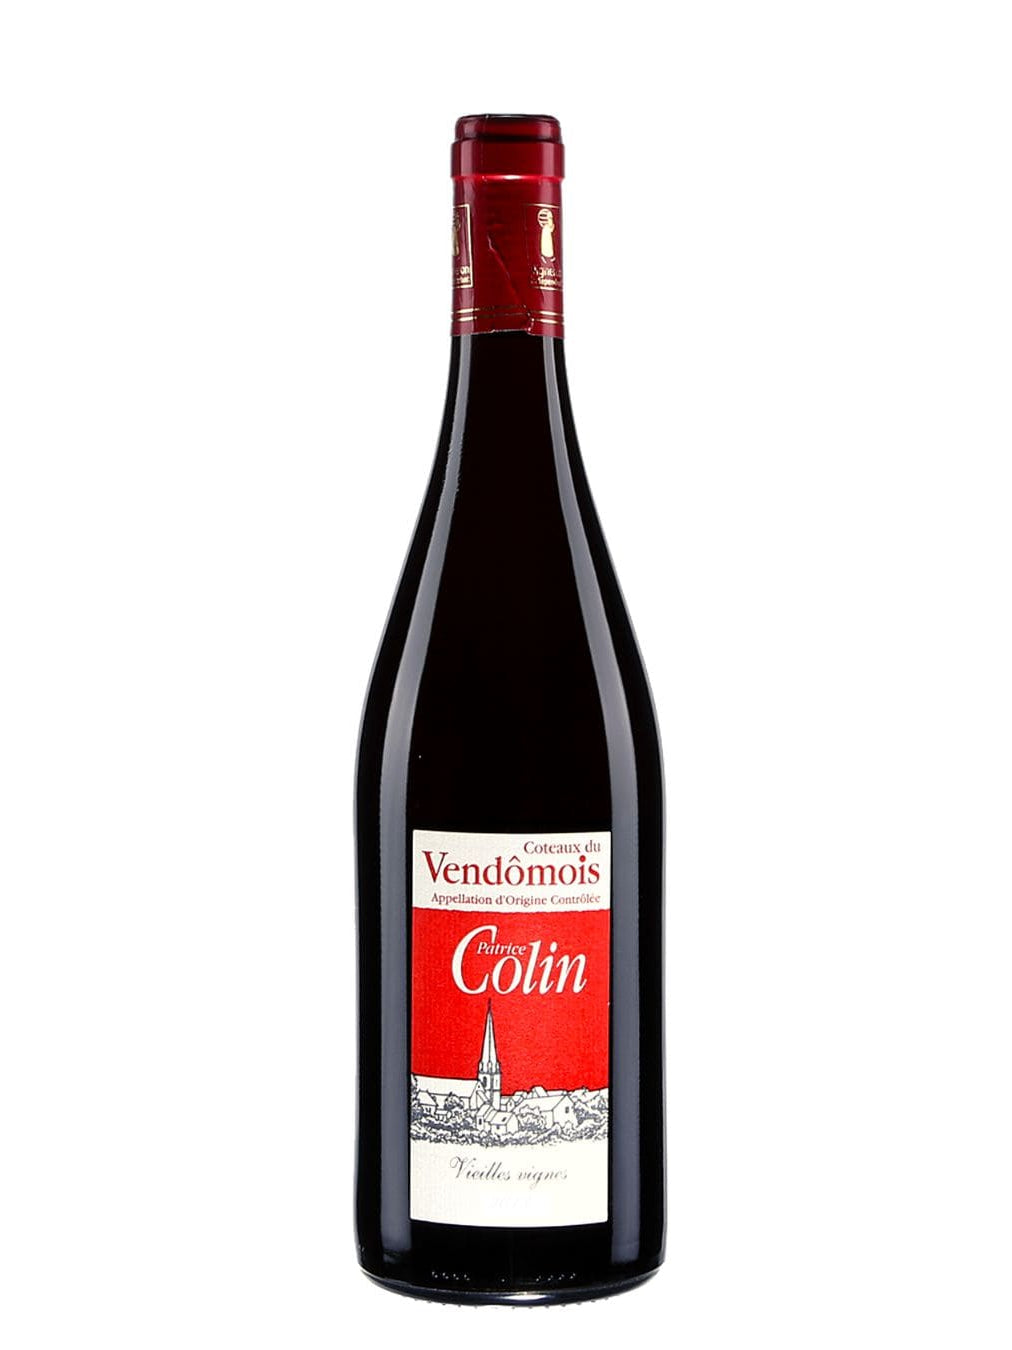 Shop Patrice Colin Patrice Colin Coteaux du Vendomois Rouge Vieilles Vignes Reserve 2020 online at PENTICTON artisanal French wine store in Hong Kong. Discover other French wines, promotions, workshops and featured offers at pentictonpacific.com 